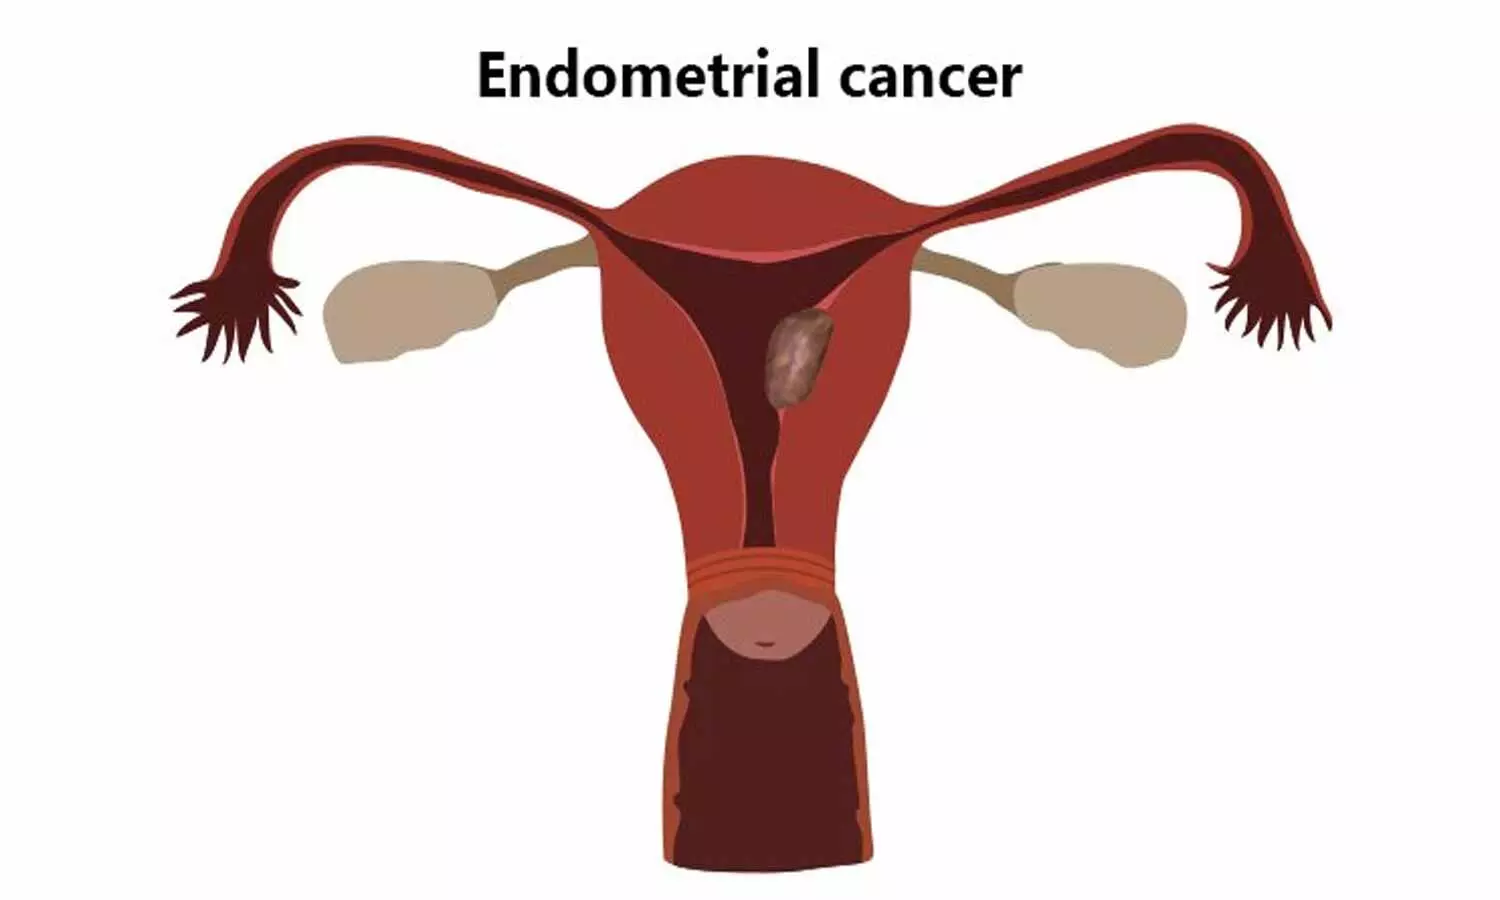 Adiposity tied to increased progression of endometrial cancer, study finds